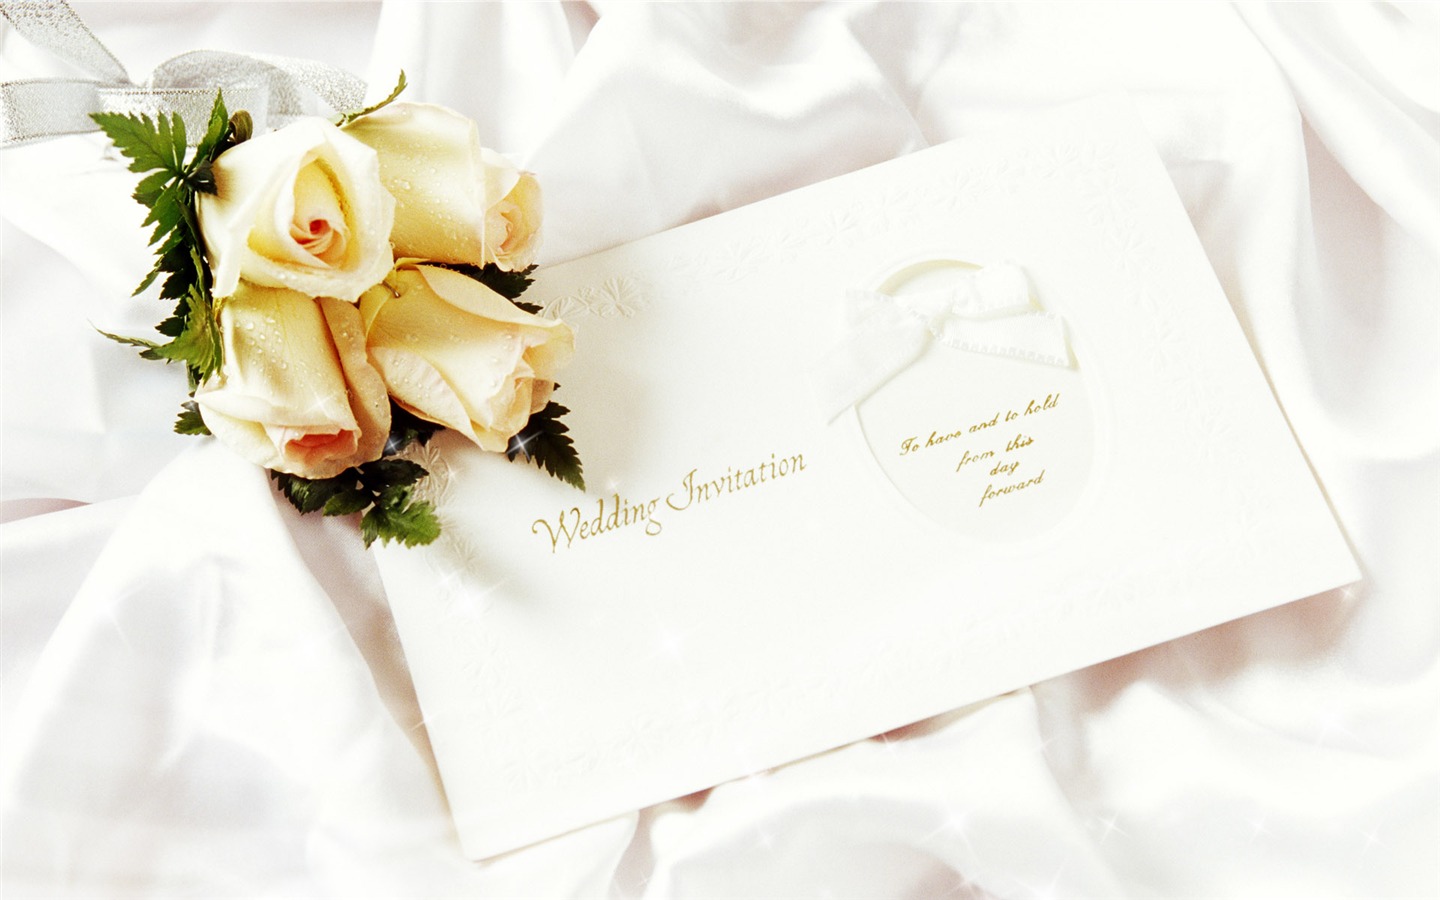 Weddings and Flowers wallpaper (1) #6 - 1440x900